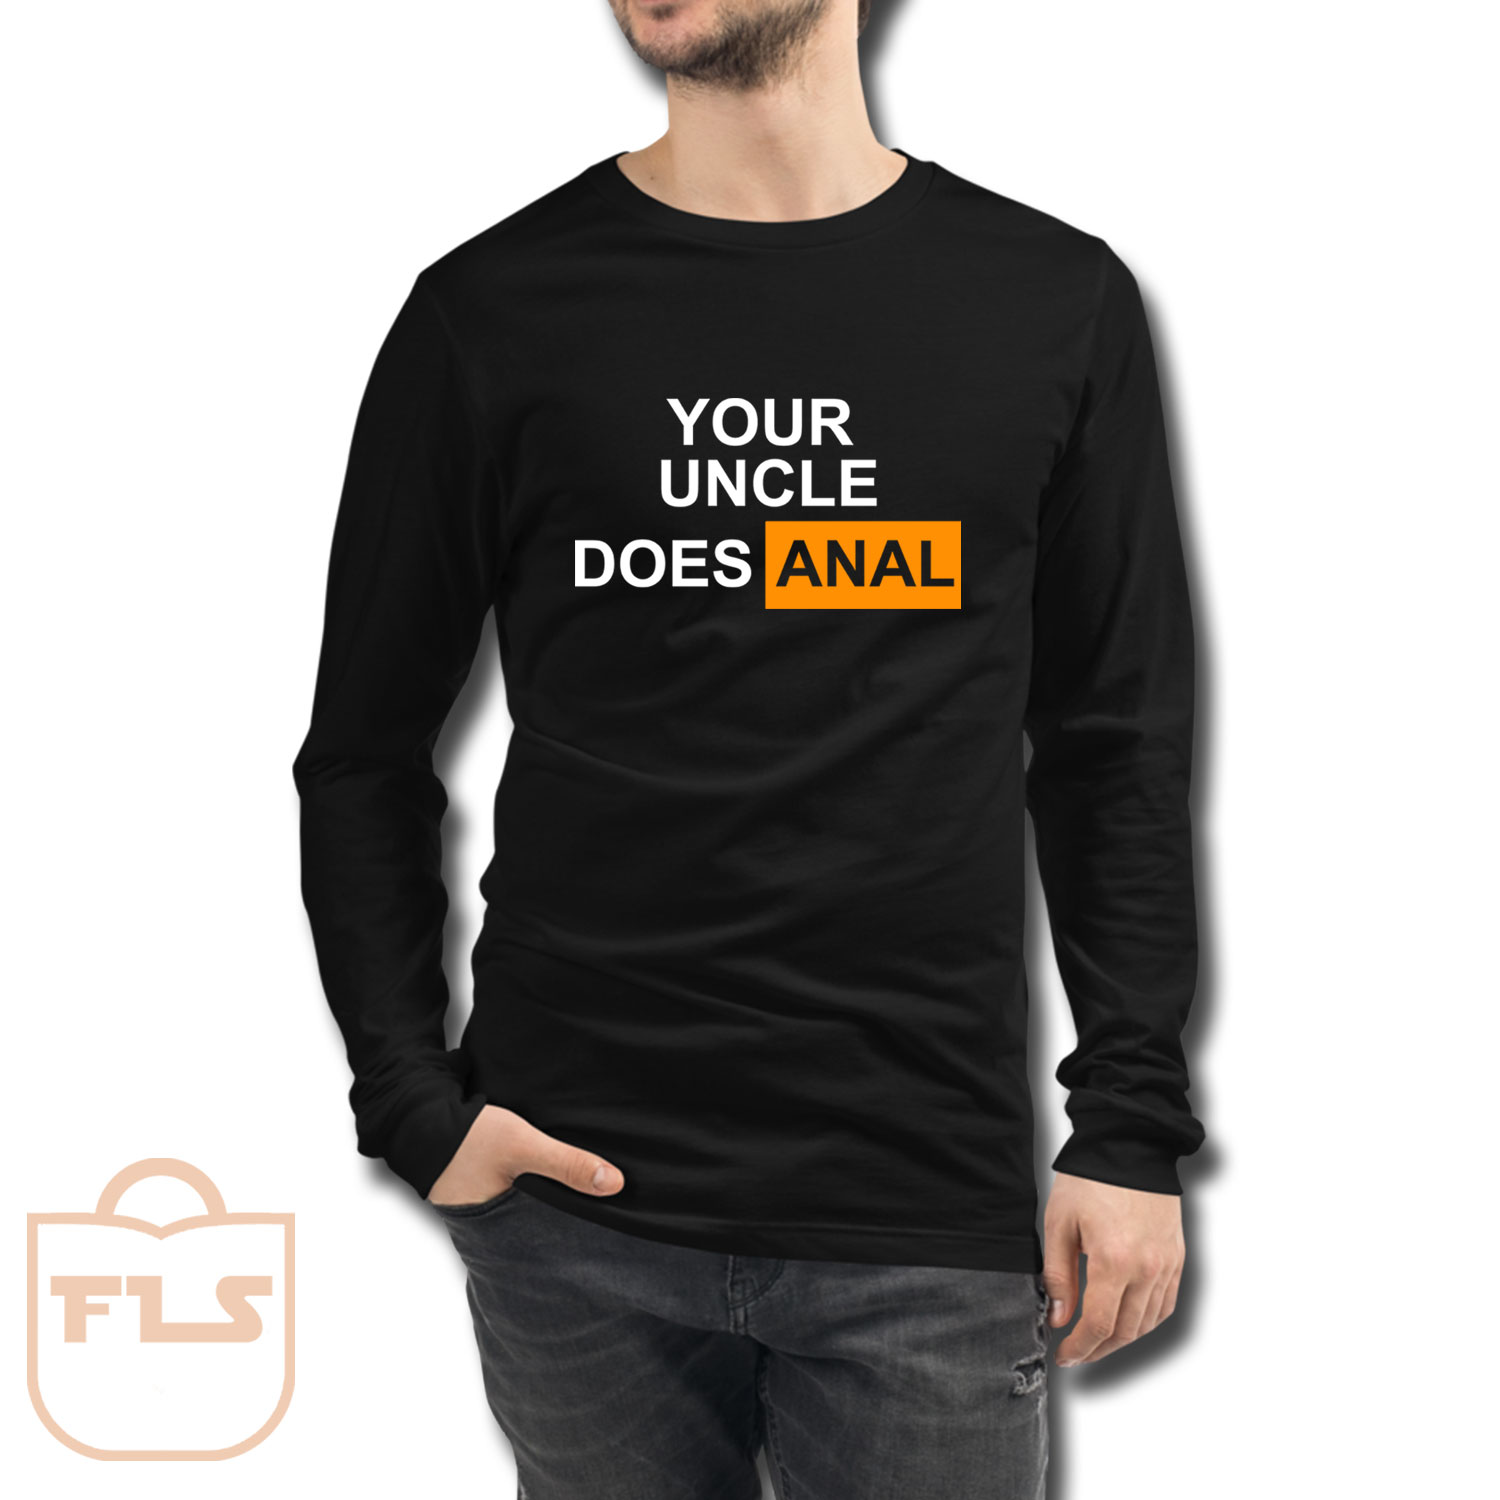 Did your uncle